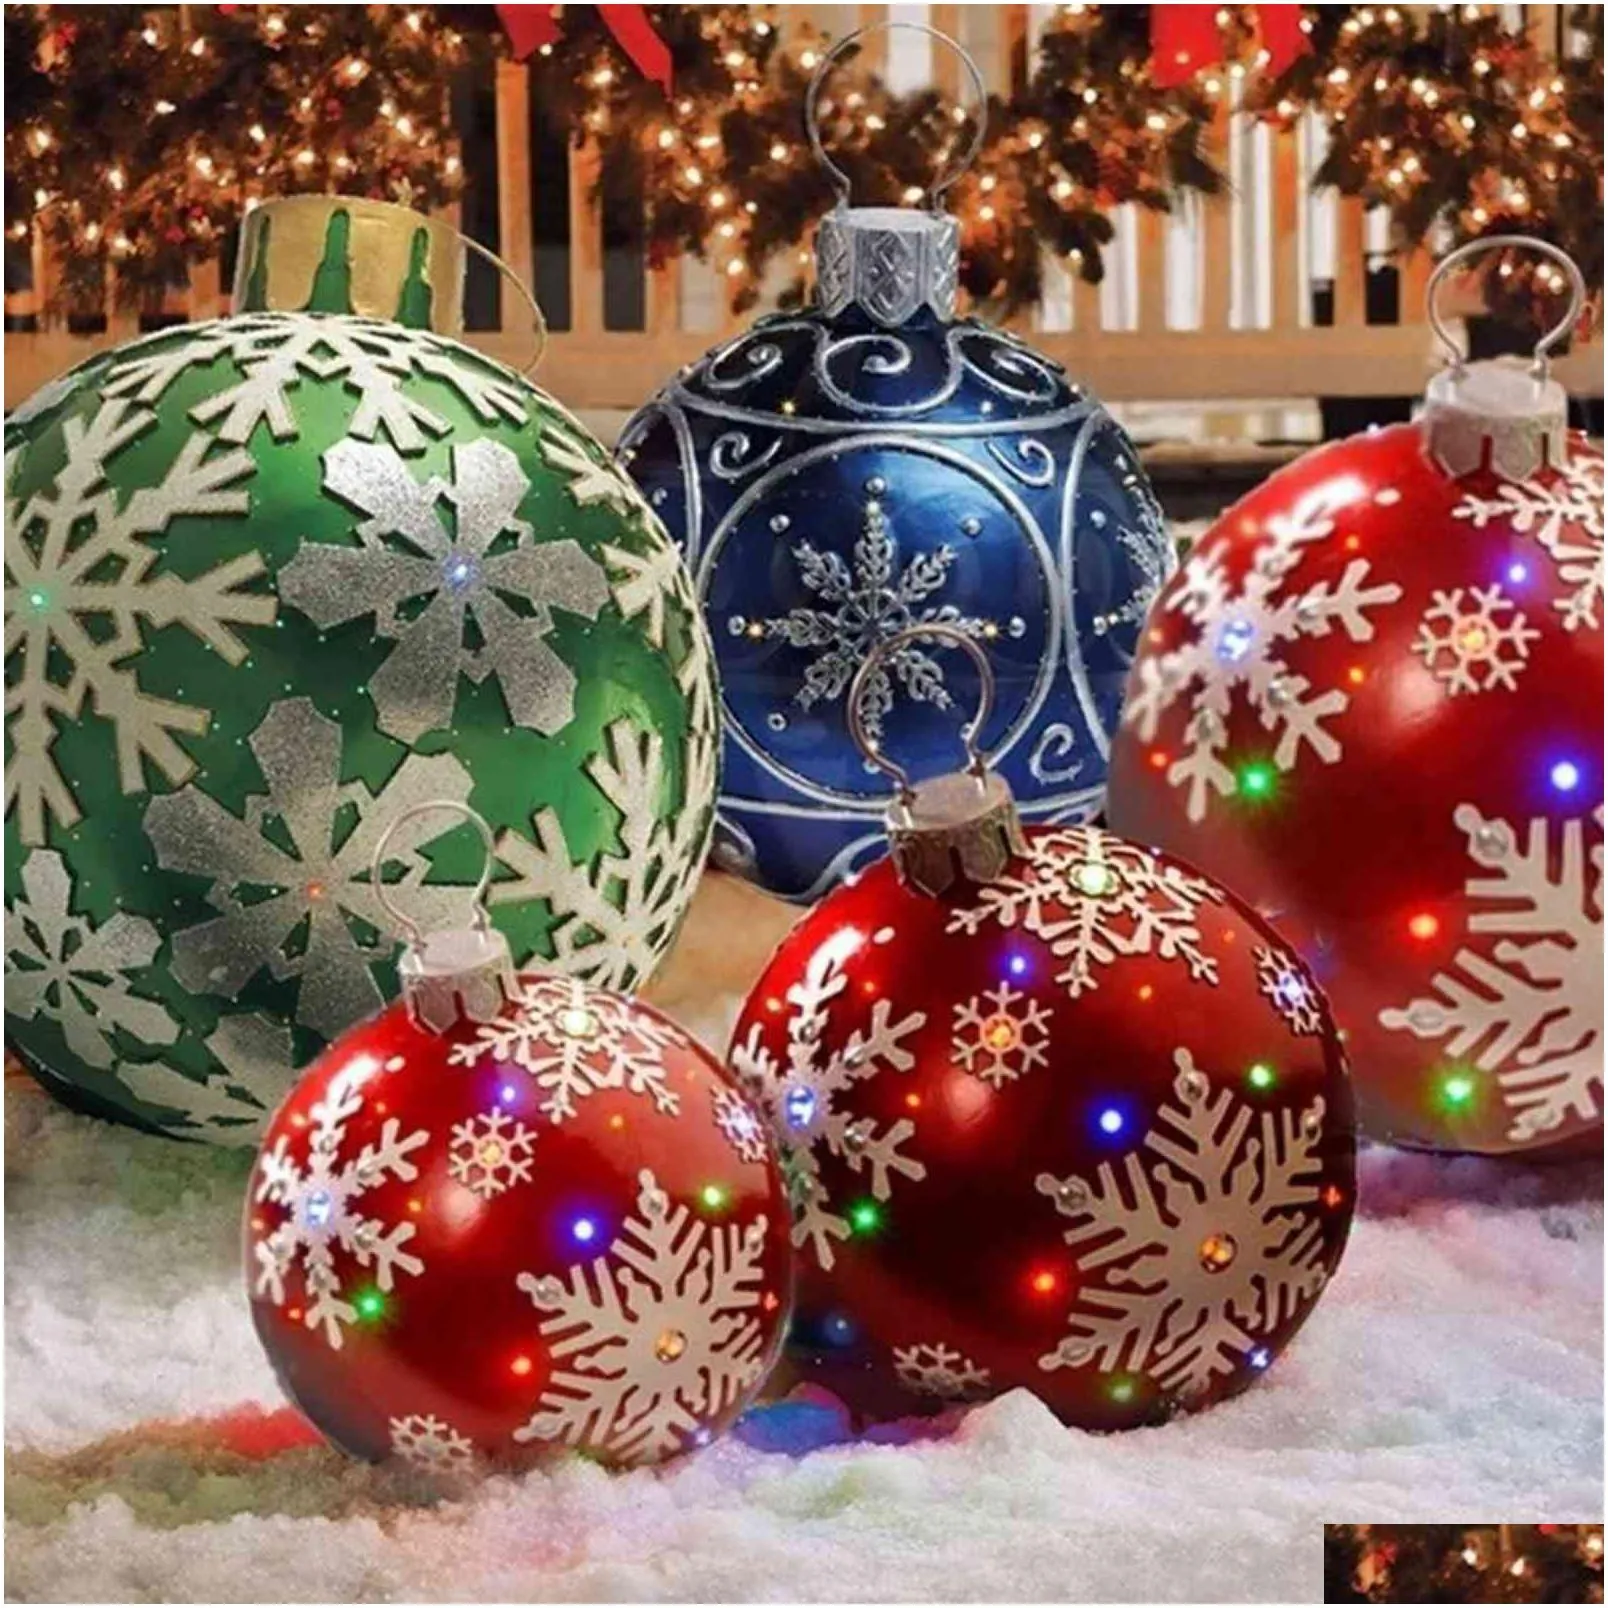 PVC Inflatable Ball Christmas Balls Tree Decos Xmas Decorative Outdoor  Holiday Inflatables Decoration 60cm 211105